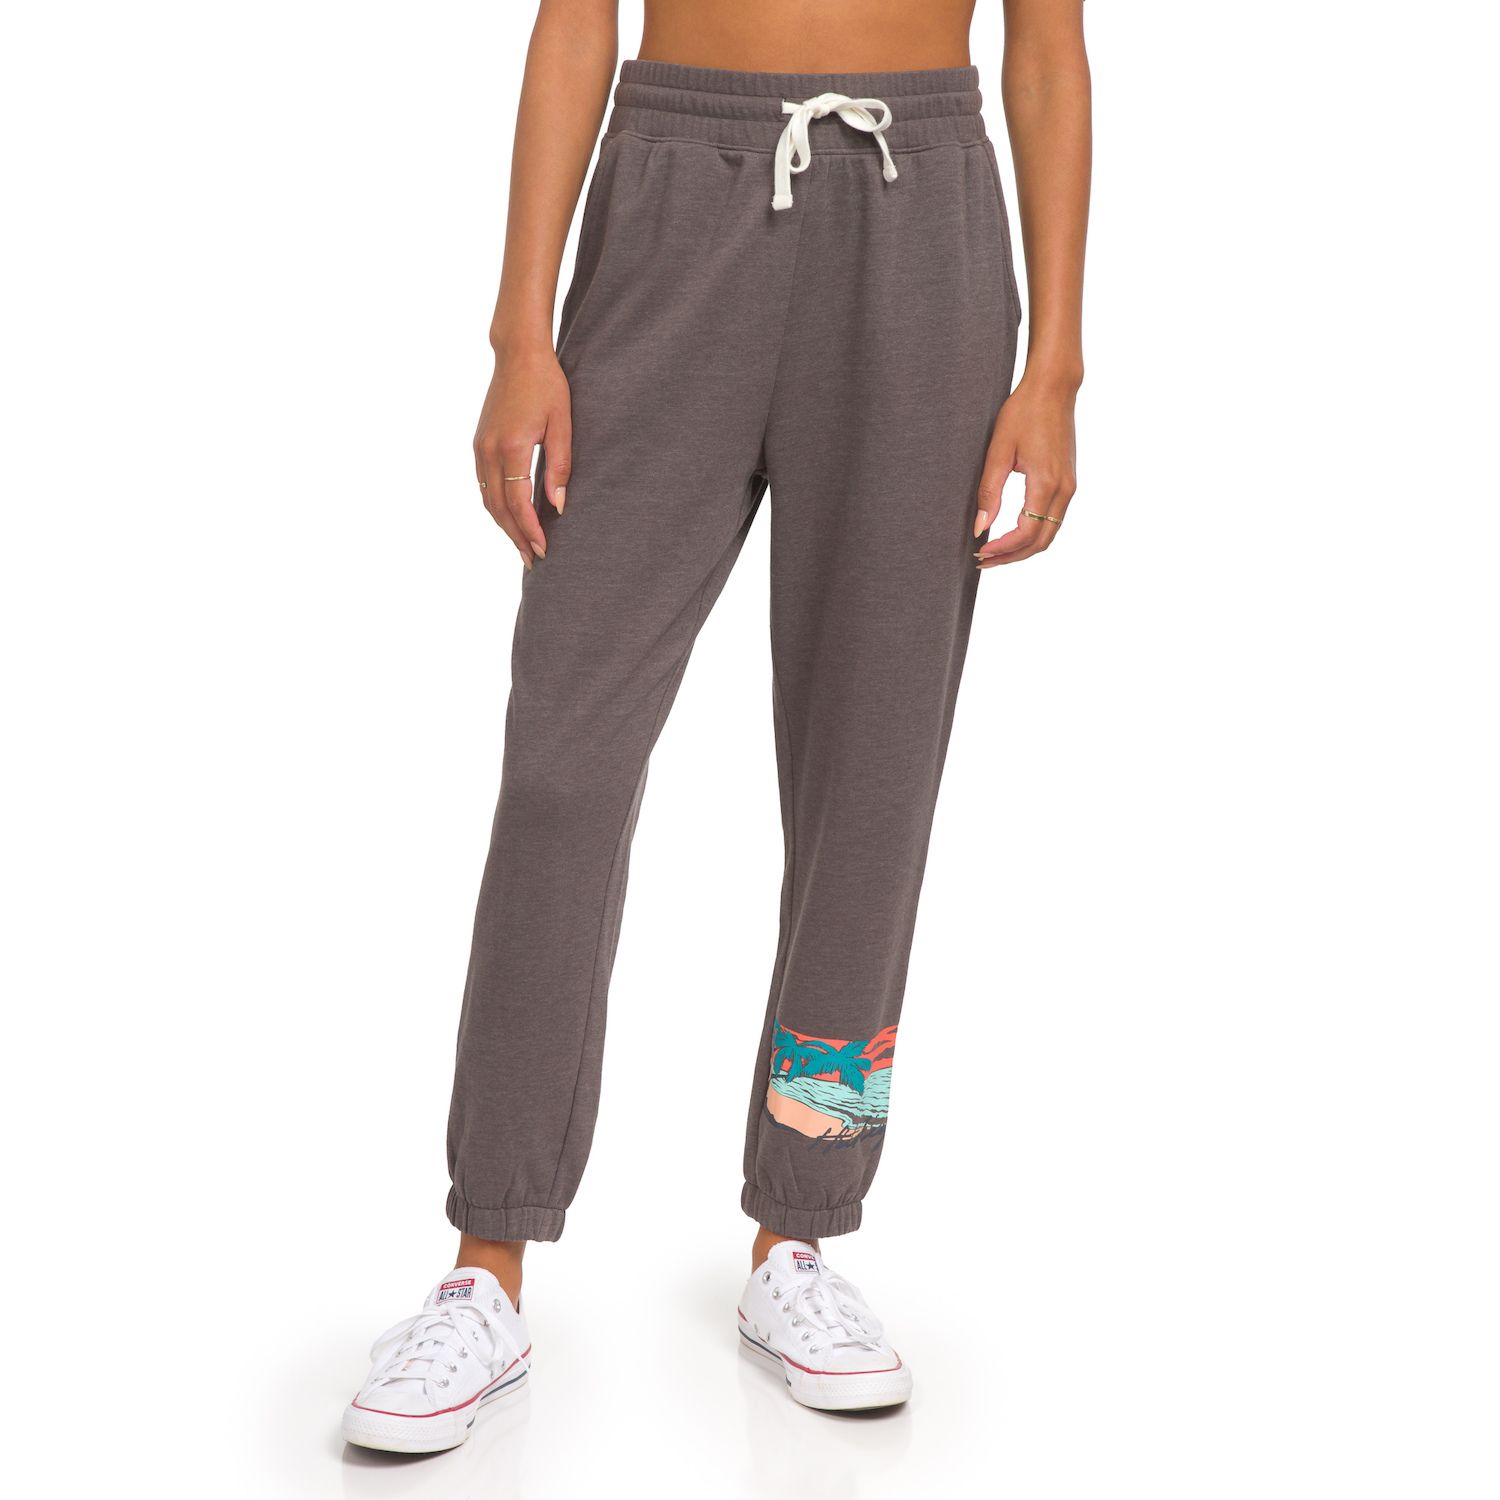 Image for Hurley Juniors' Boyfriend Joggers at Kohl's.